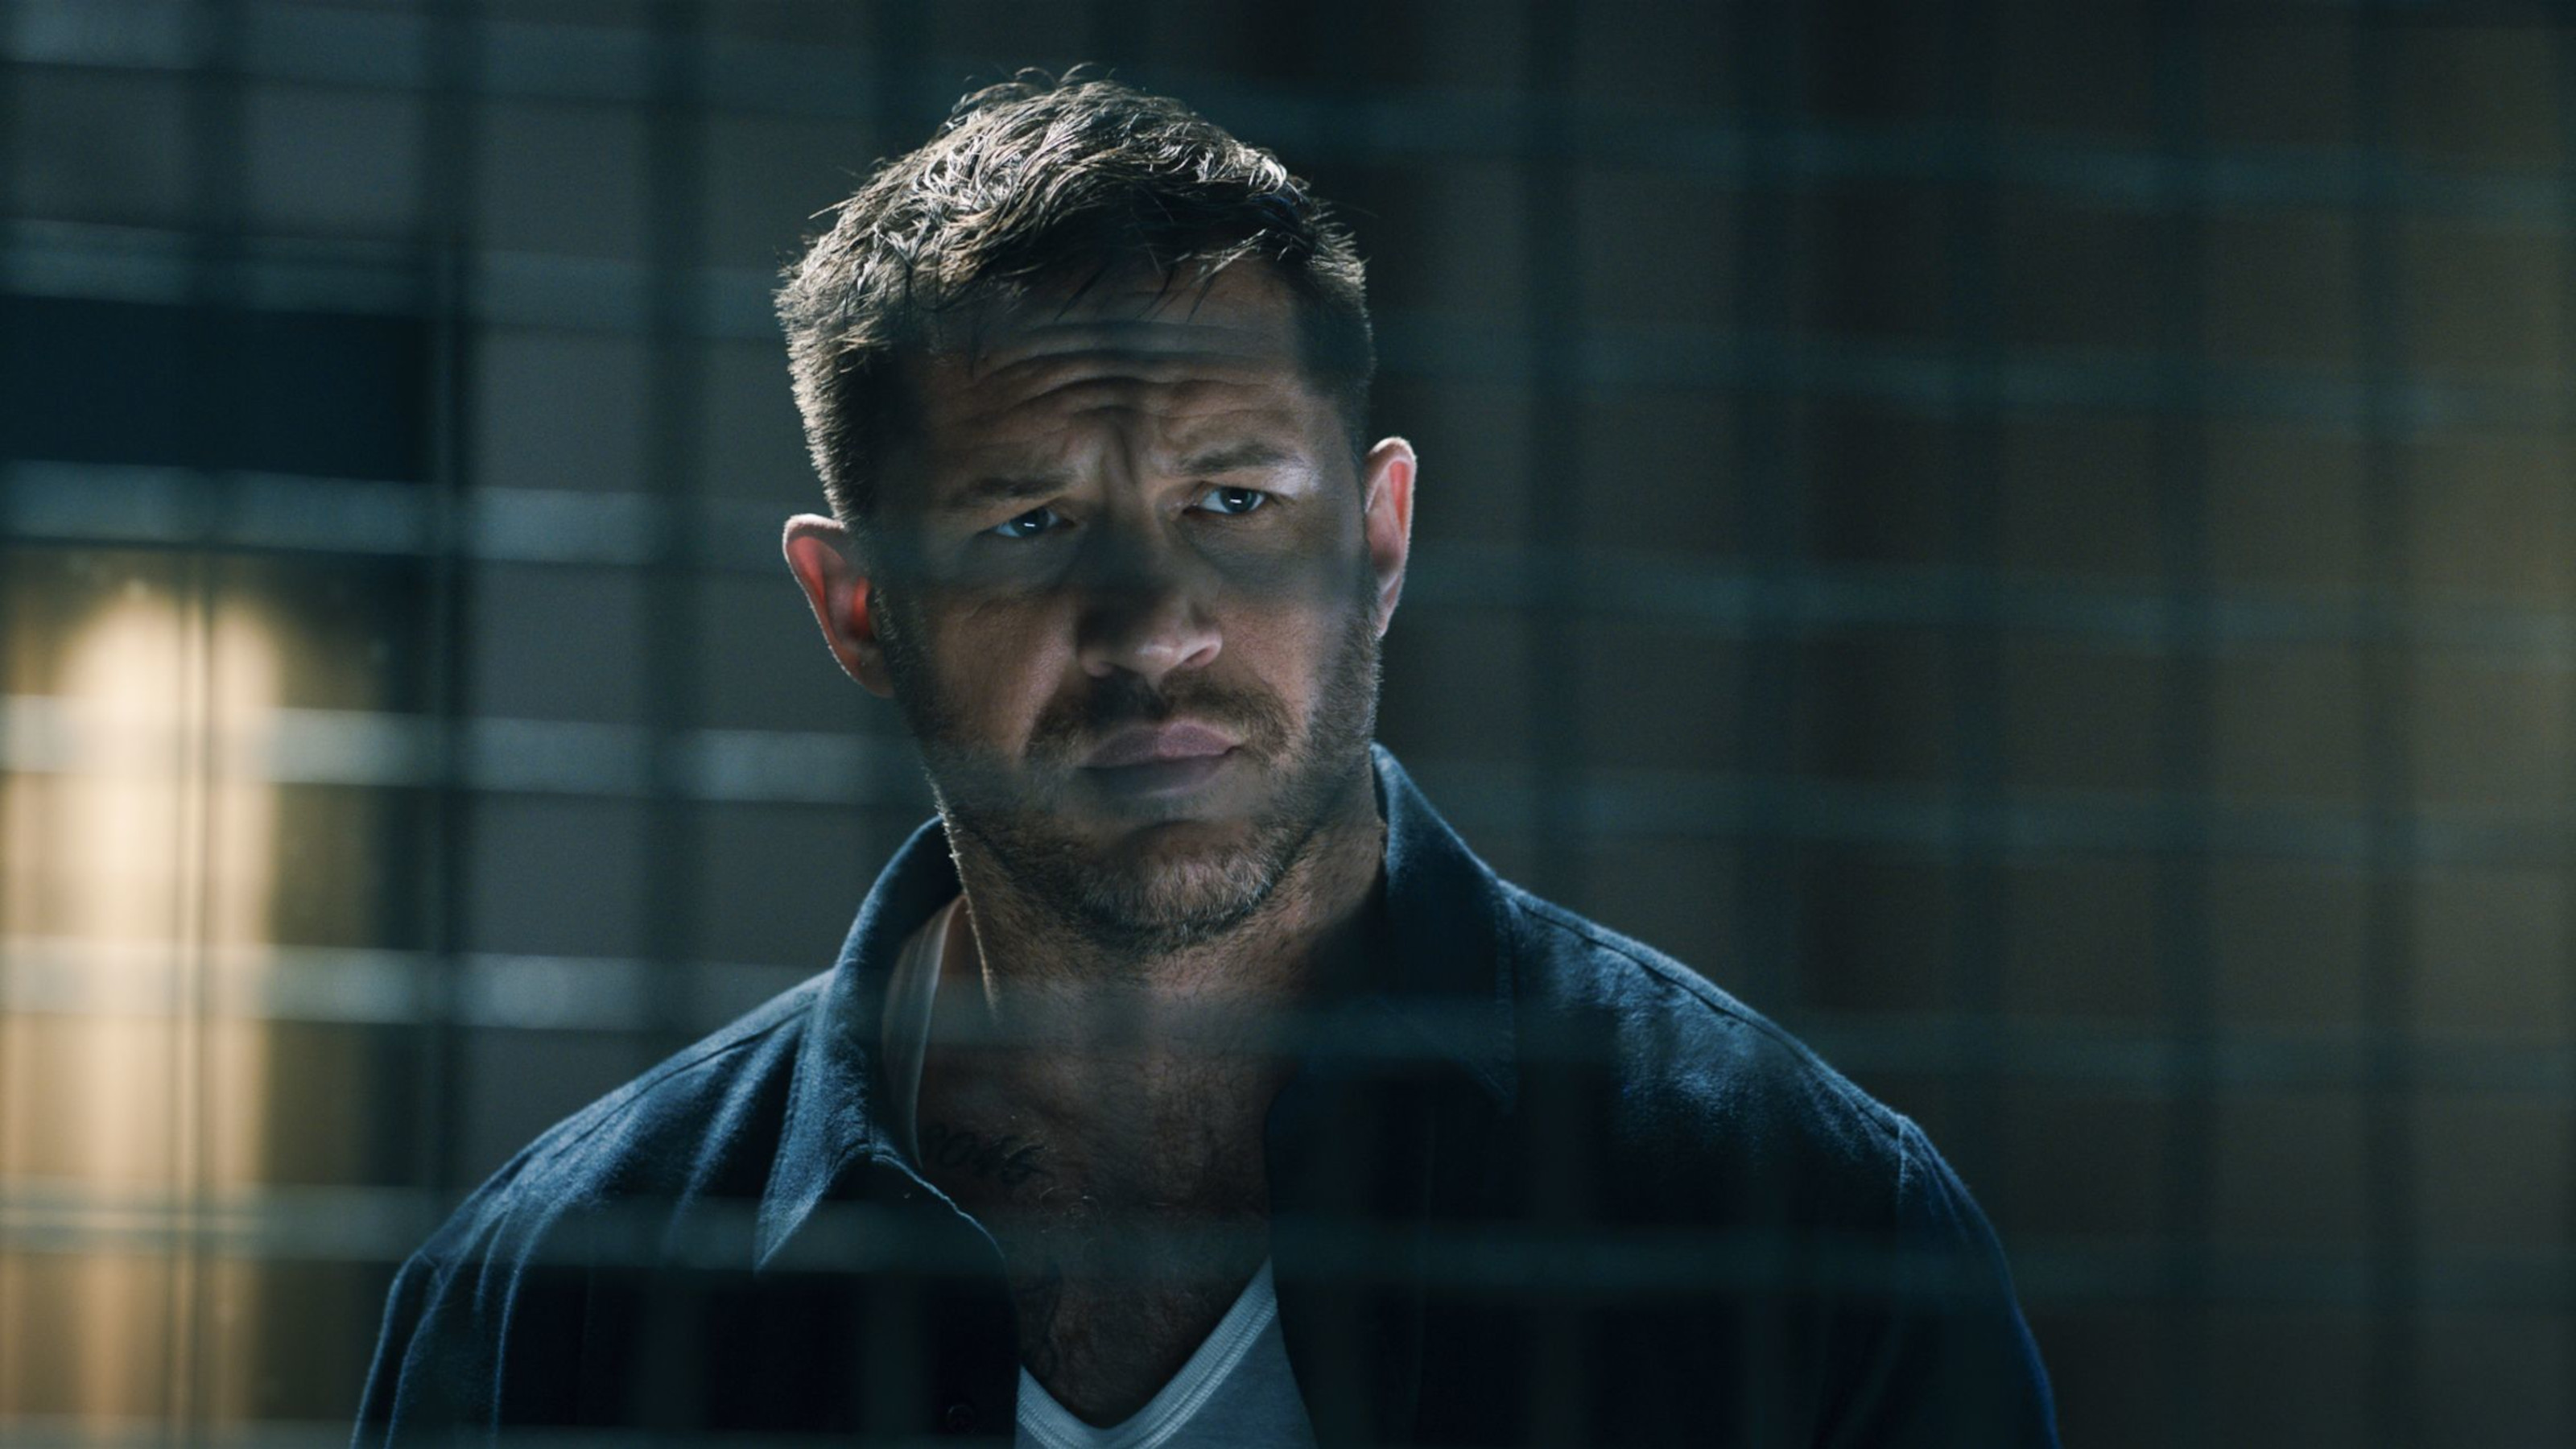 Still from the film showing Eddie Brock looking theough a cage